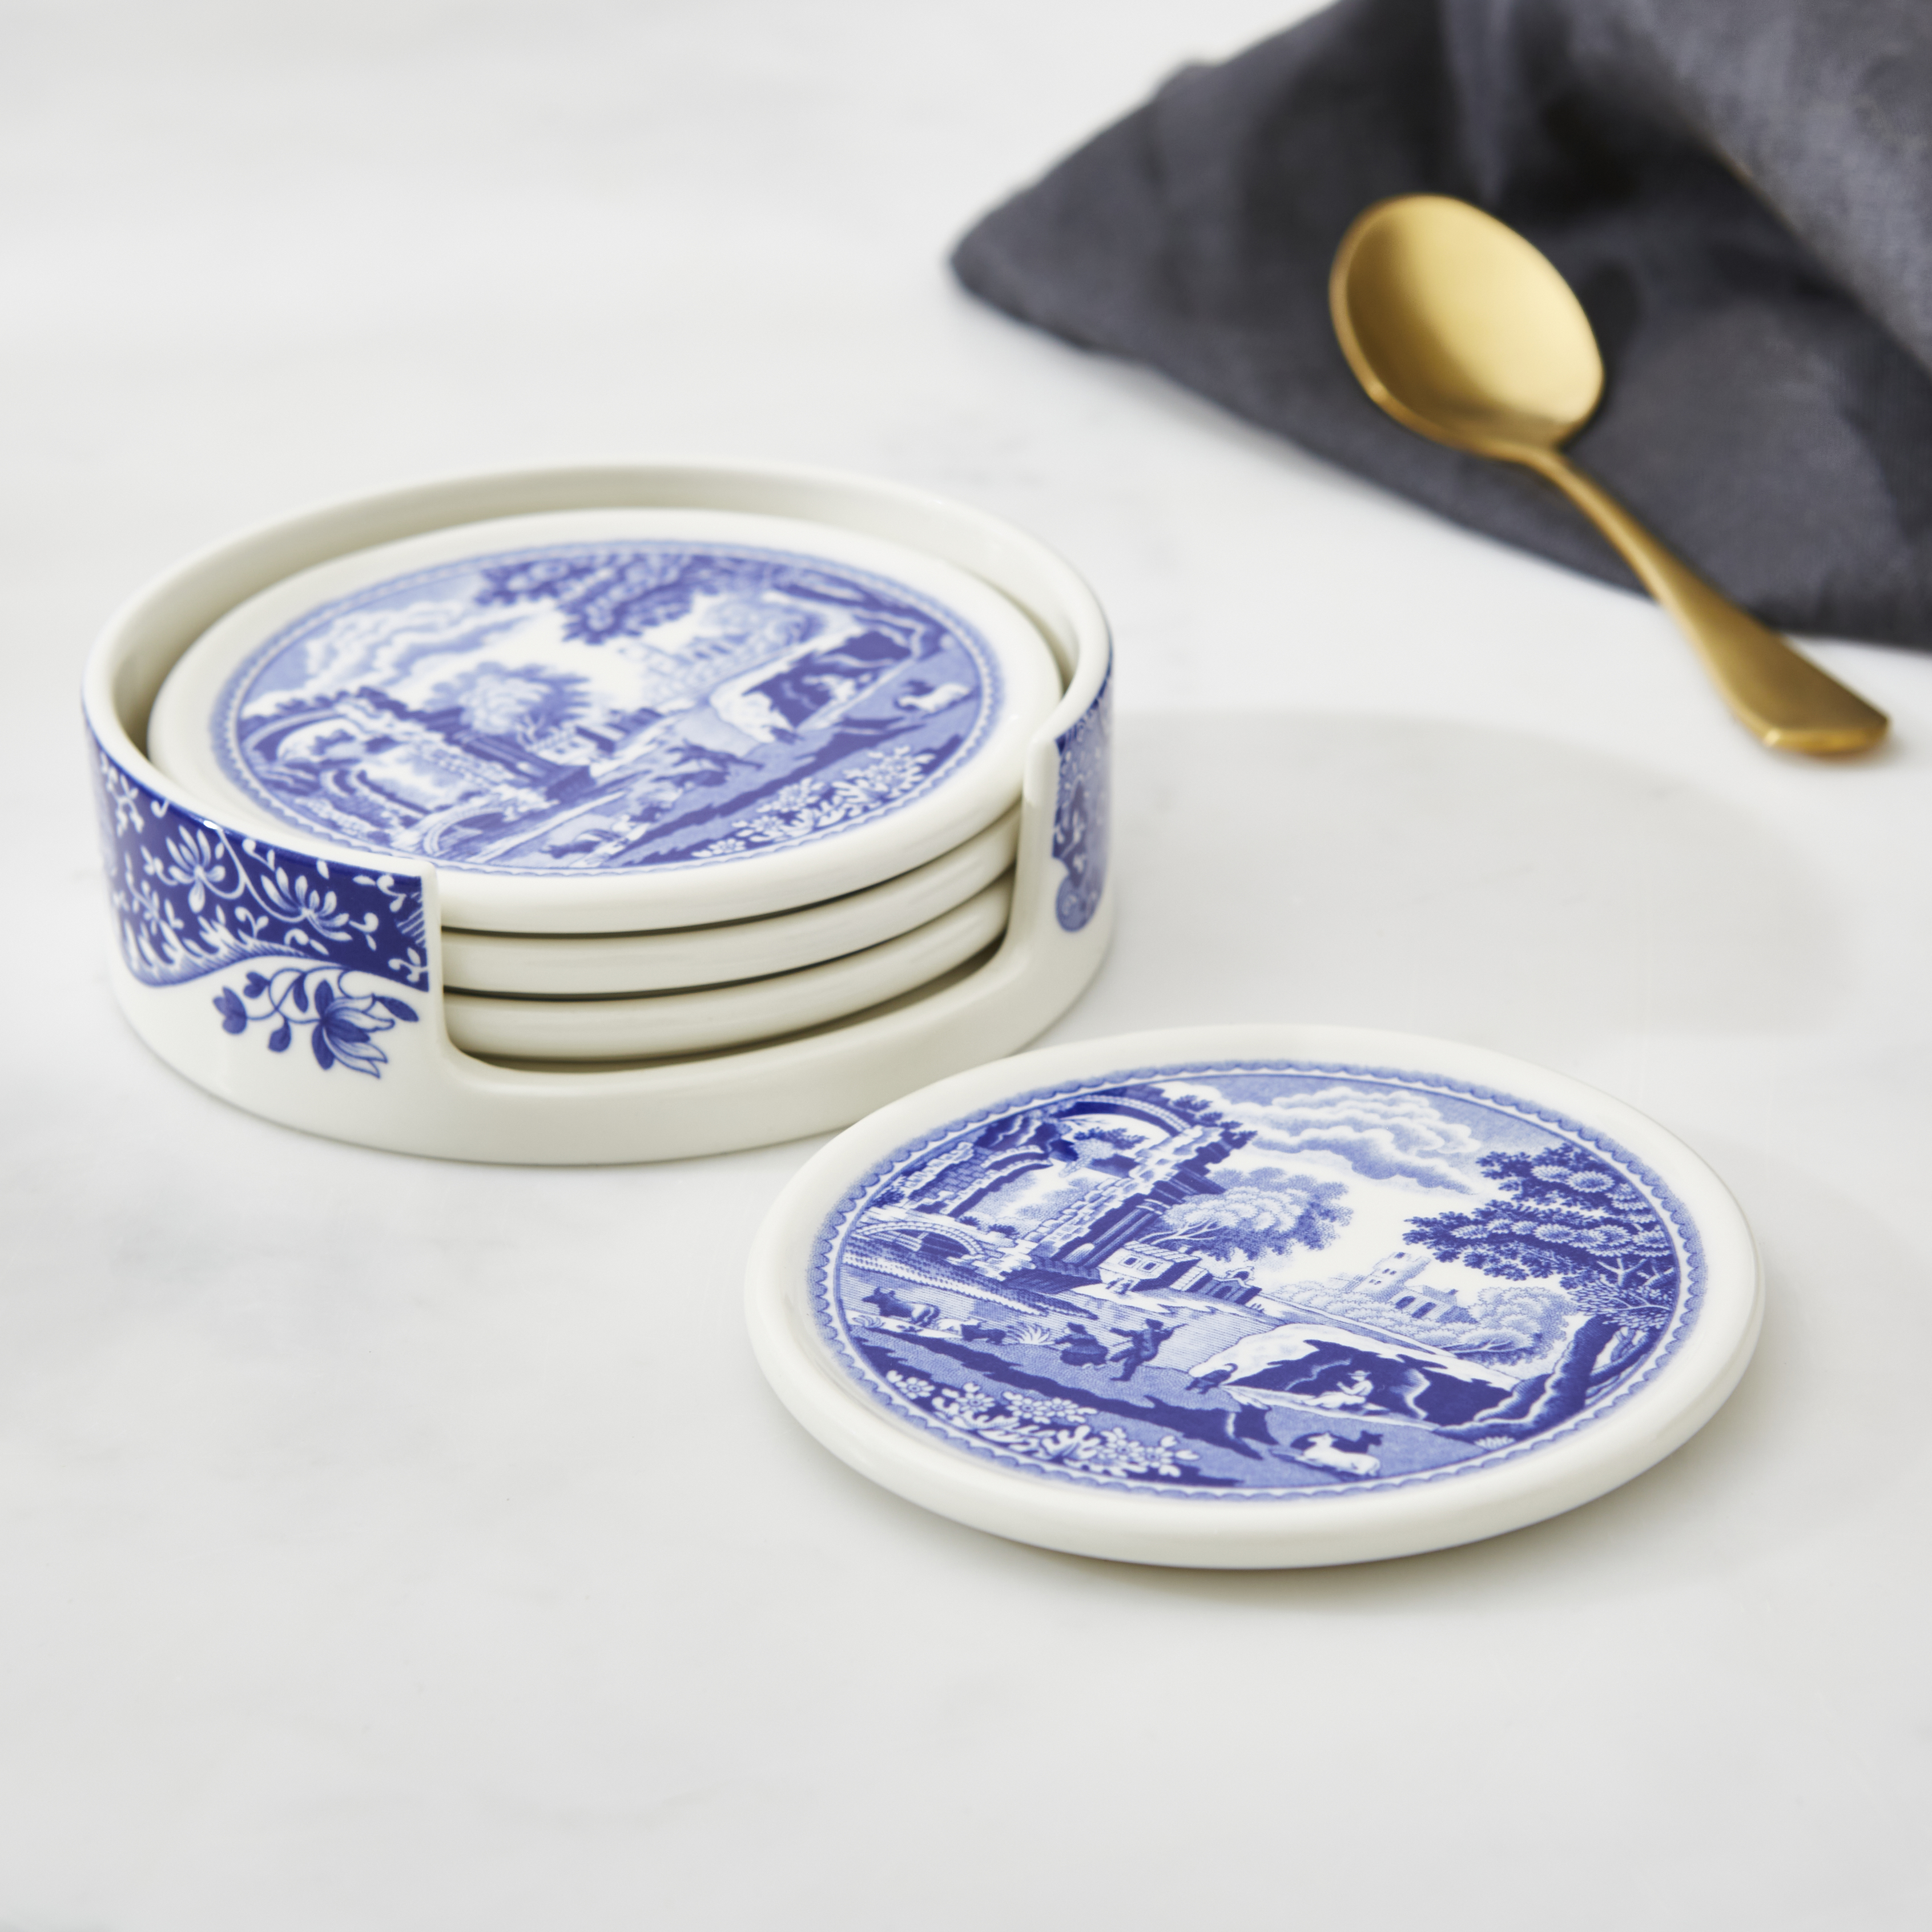 Blue Italian 4 Piece Ceramic Coasters with Holder image number null